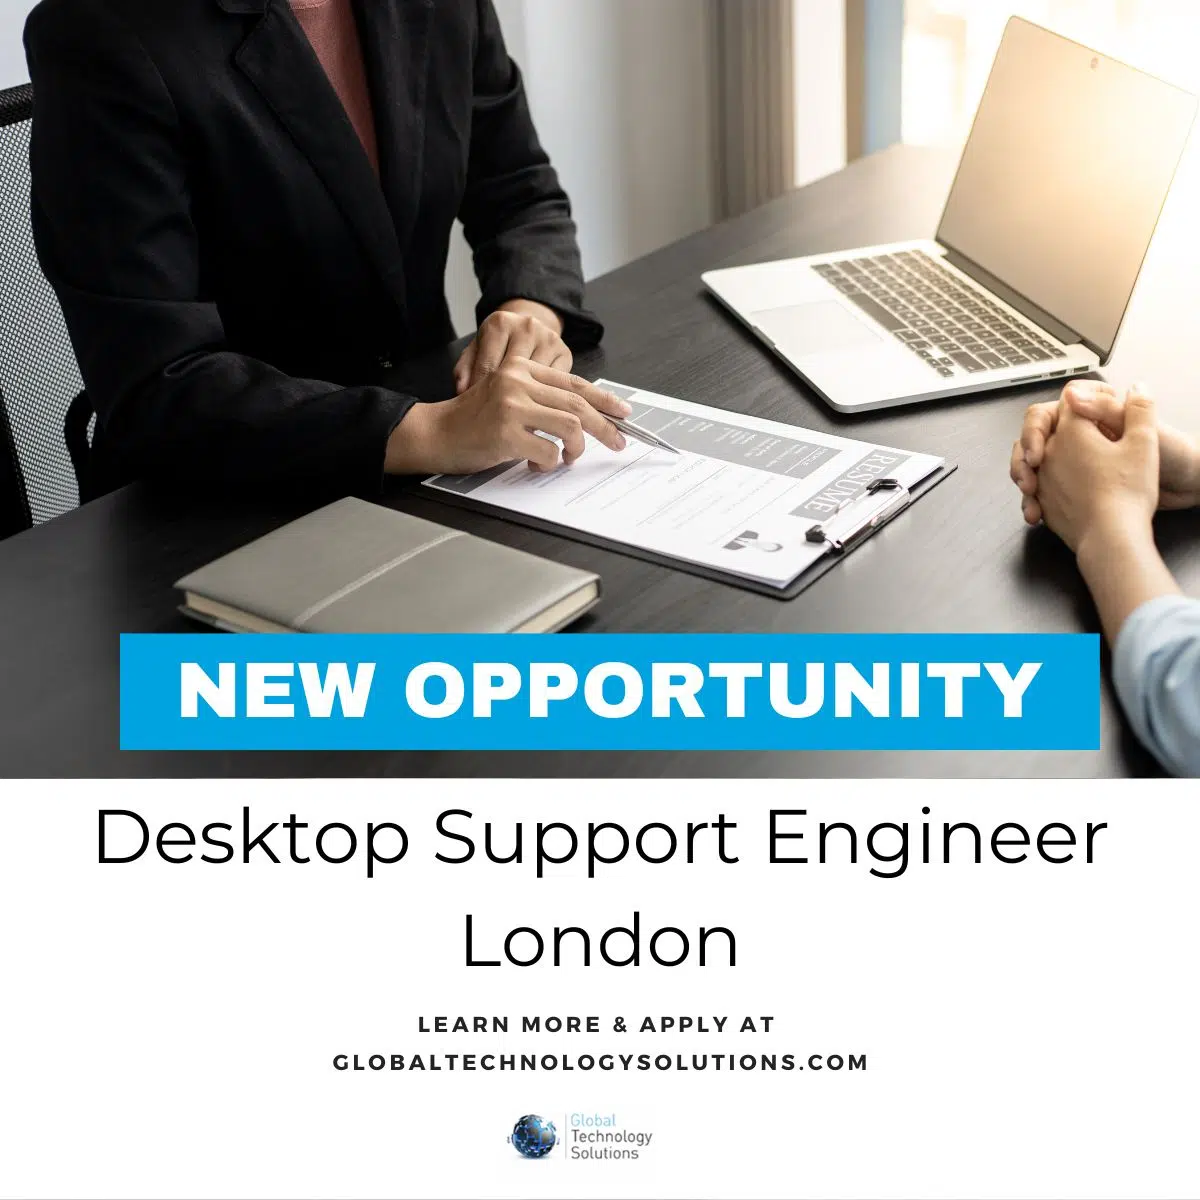 GTS IT Contract Jobs London, working as a Desktop Support Engineer.